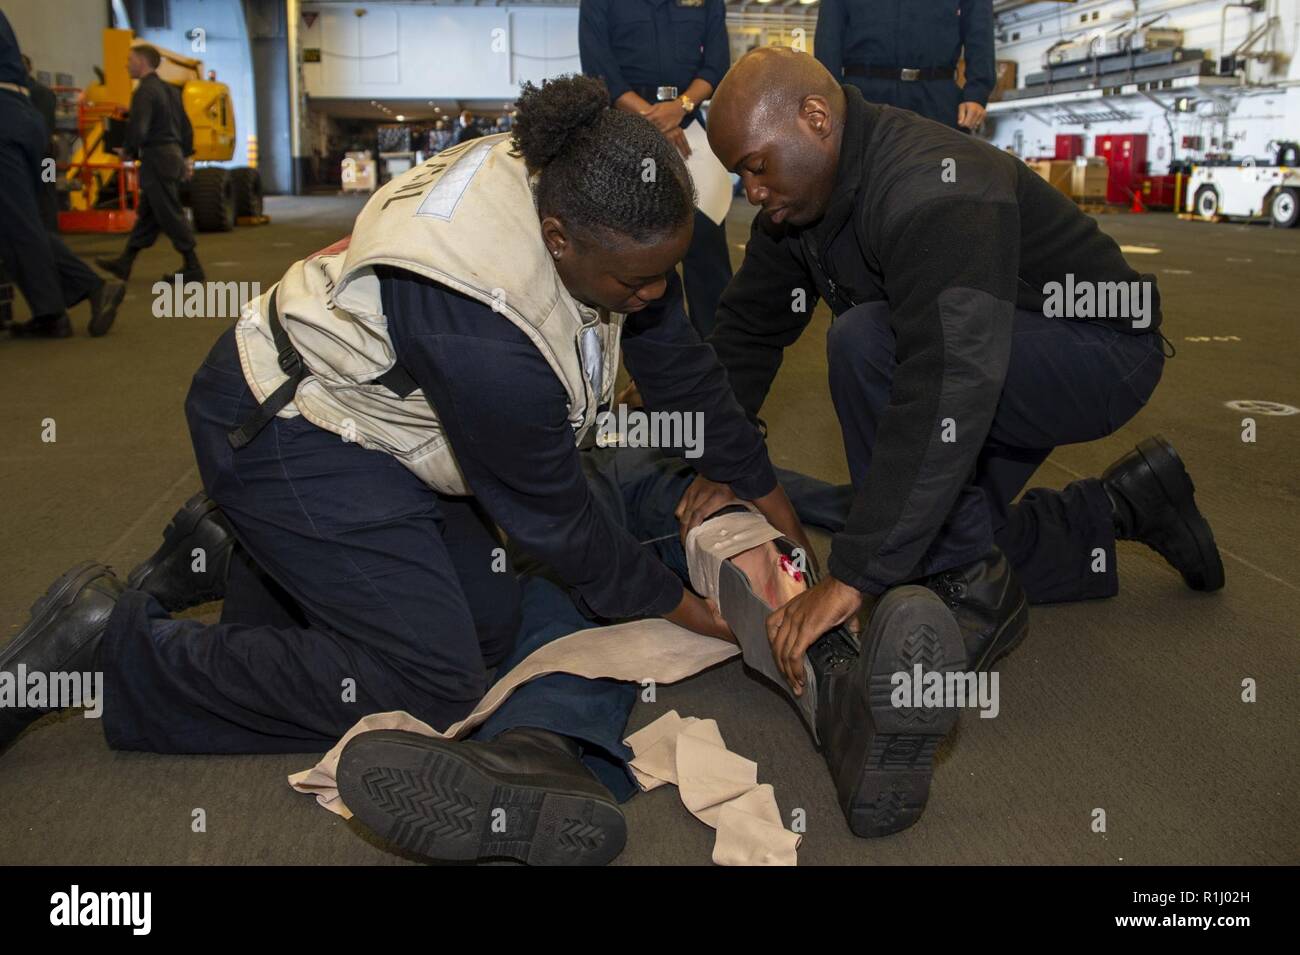 PACIFIC OCEAN (Sept. 21, 2018) Hospital Corpsman 3rd Class Mercy Onwunta, left, from Bronx, N.Y., and Hospital Corpsman 2nd Class Dominique Scott, from Houston, treat a simulated casualty during a mass casualty drill in the hangar bay of the amphibious assault ship USS Bonhomme Richard (LHD 6). Bonhomme Richard is currently underway in the U.S. 3rd Fleet area of operations. Stock Photo